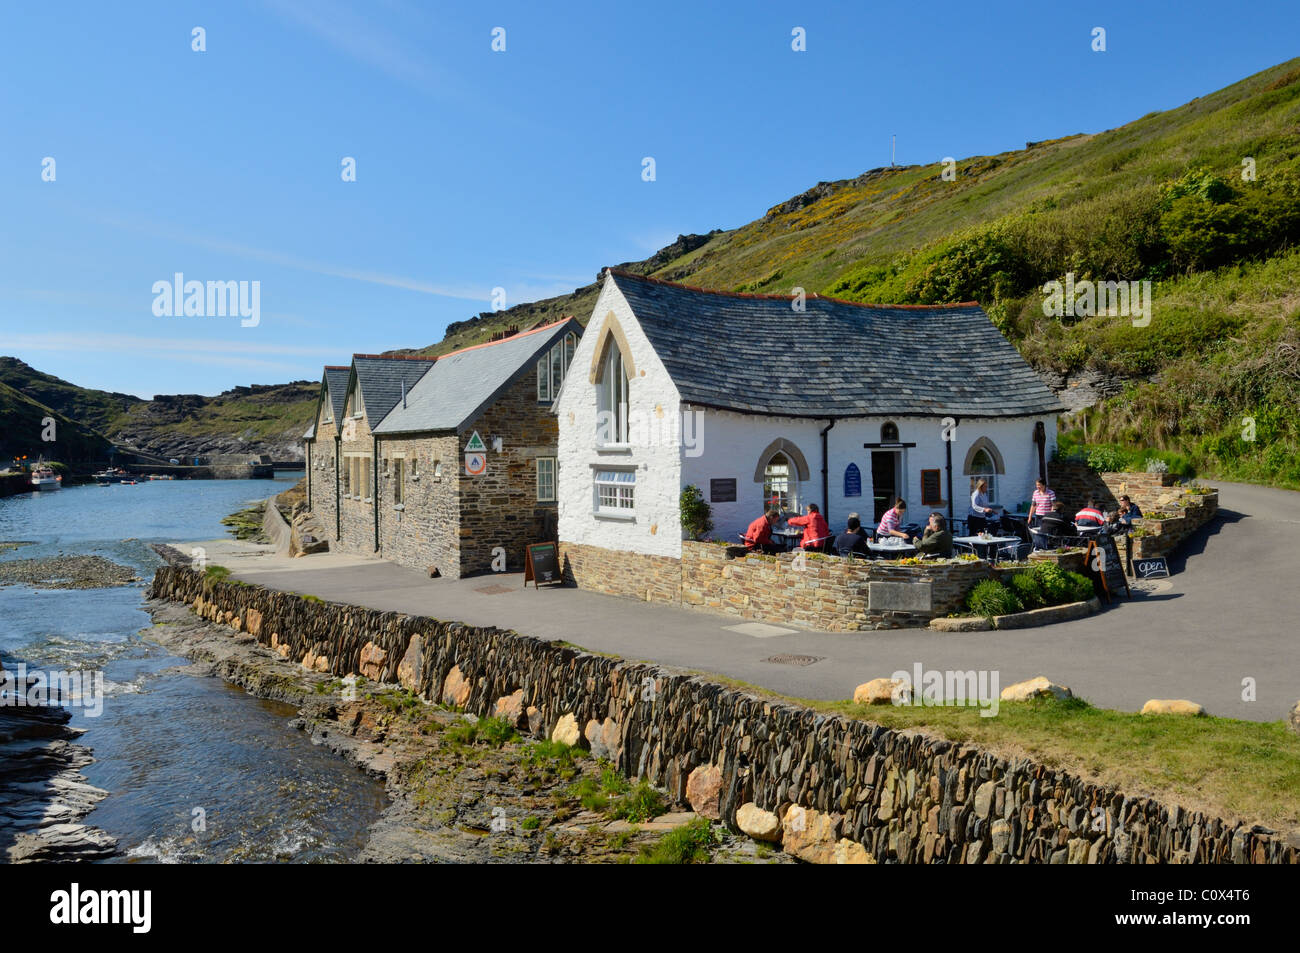 A tea room by the River Valency at Boscastle Harbour in North Cornwall, England. Stock Photo